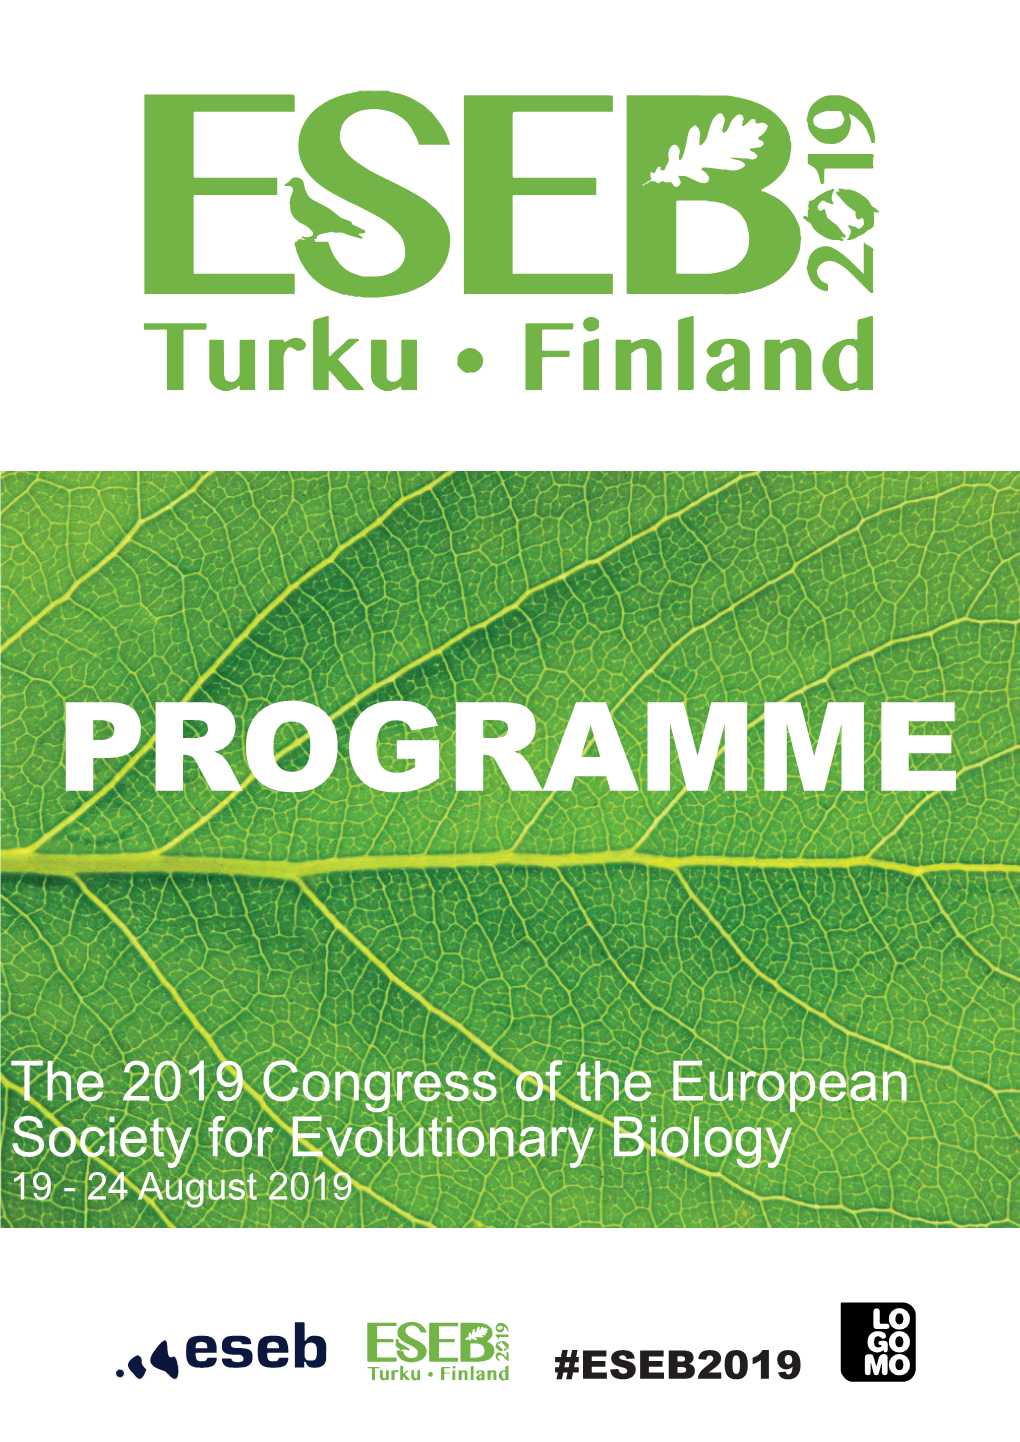 The 2019 Congress of the European Society for Evolutionary Biology 19 - 24 August 2019